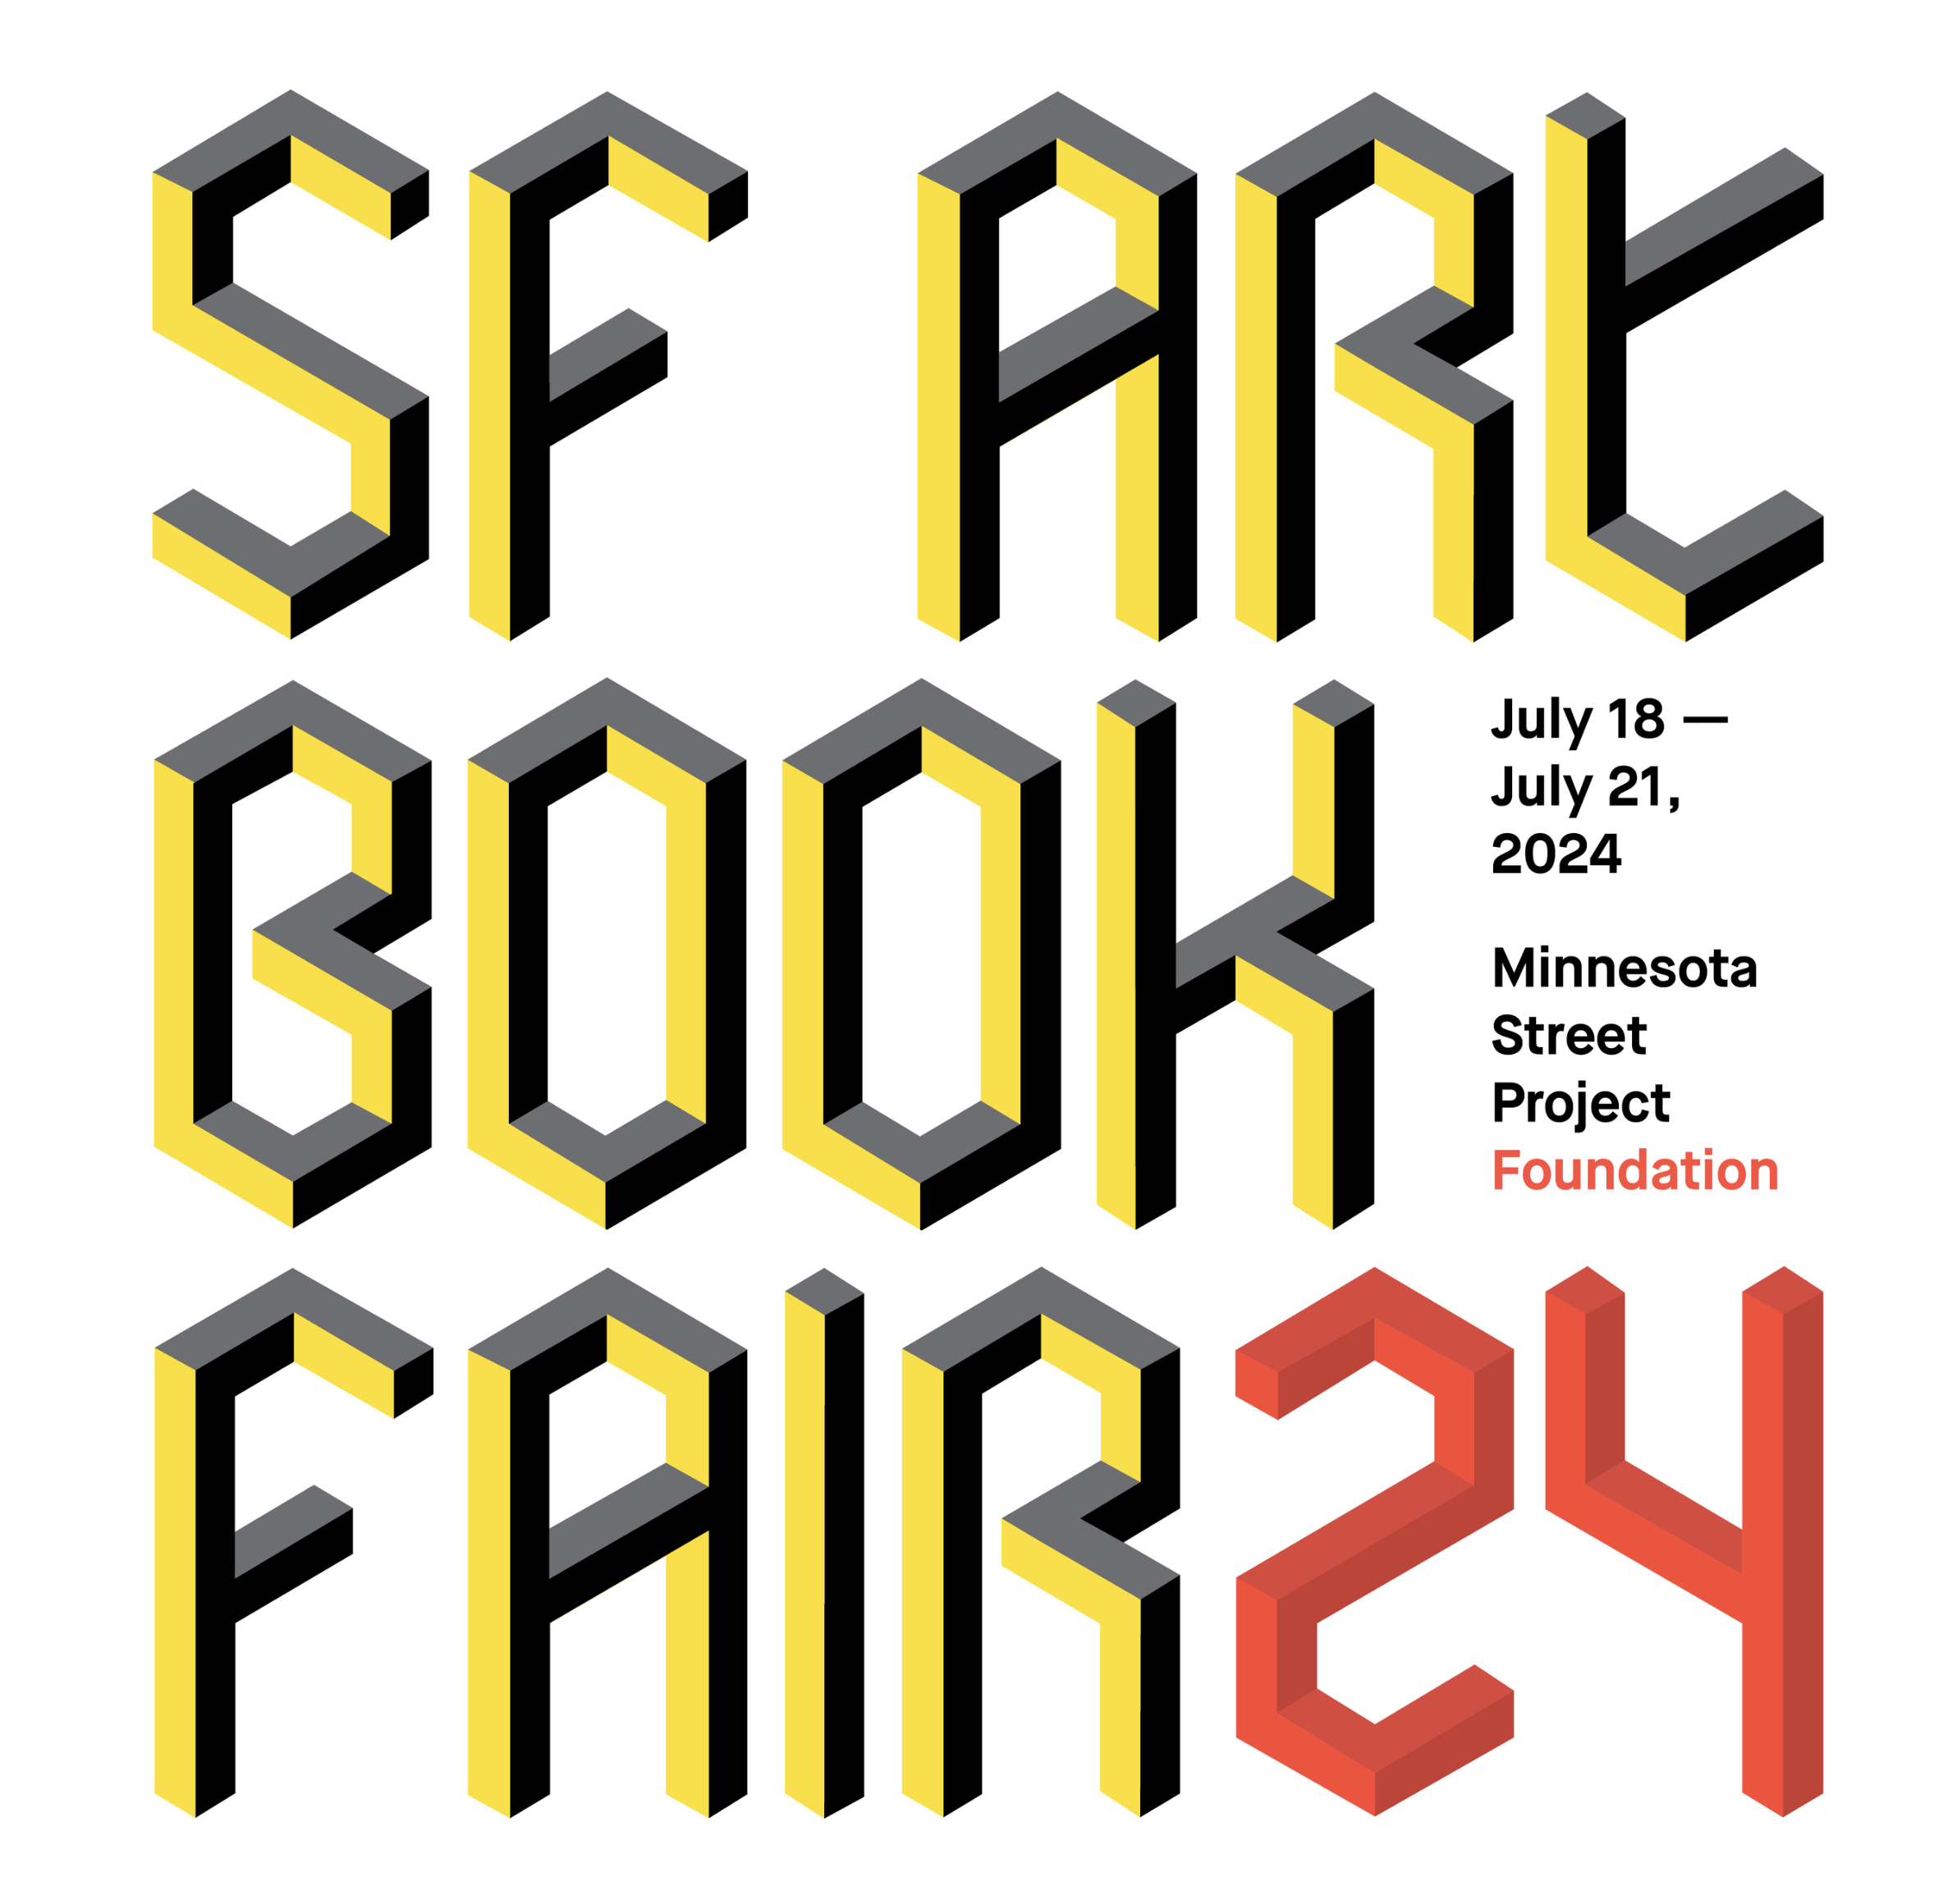 a flyer with bold typography. yellow and gray letters spell "SF ART BOOK FAIR" and red numbers read "@$". smaller text is information repeated from the event listing.